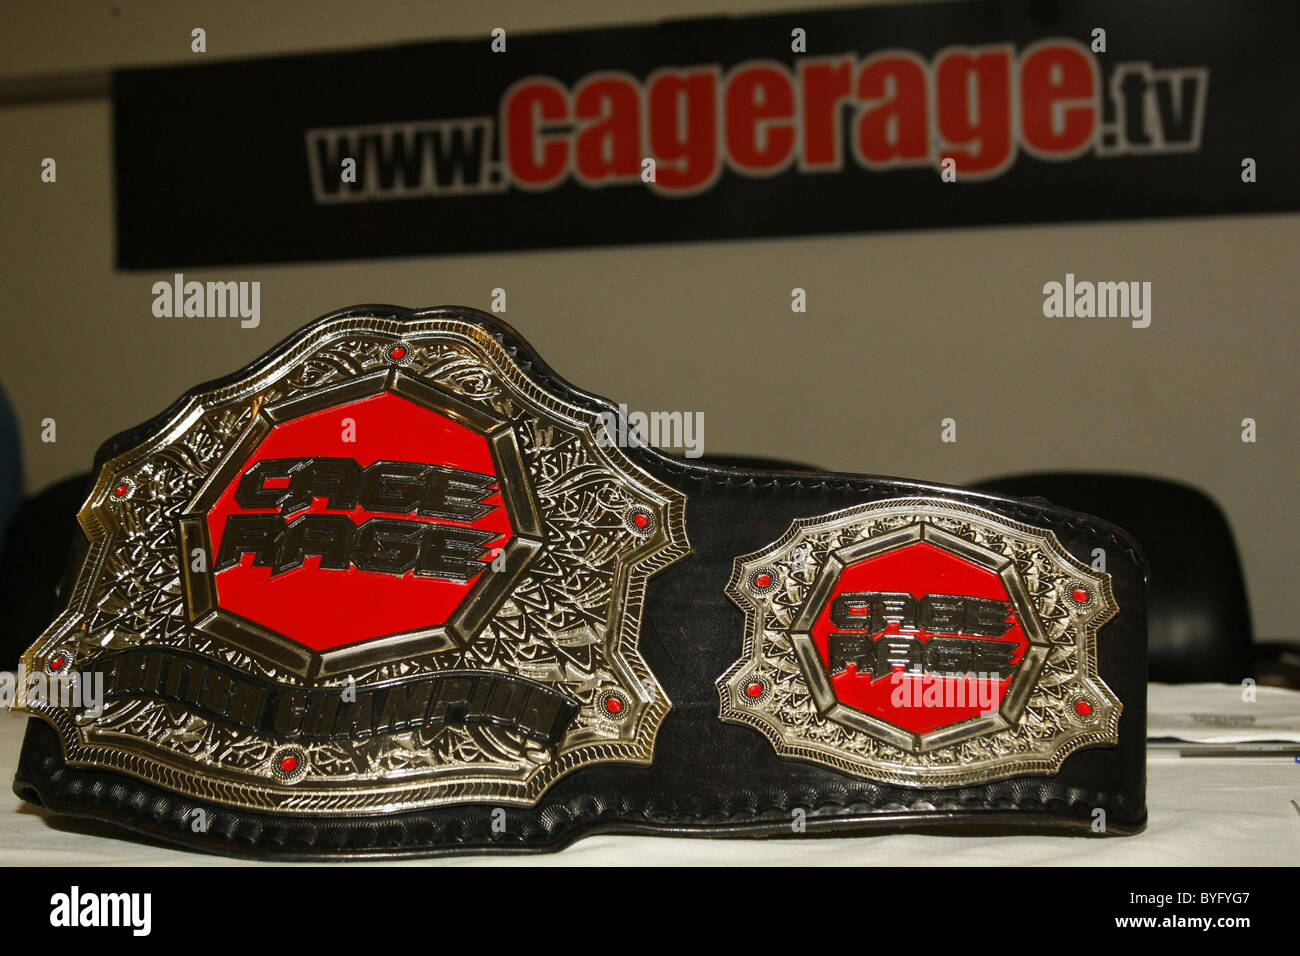 Championship belts Press conference for Cage Rage, which will return to  Wembley Arena on 10.02.07 London, England - 09.02.07 Stock Photo - Alamy